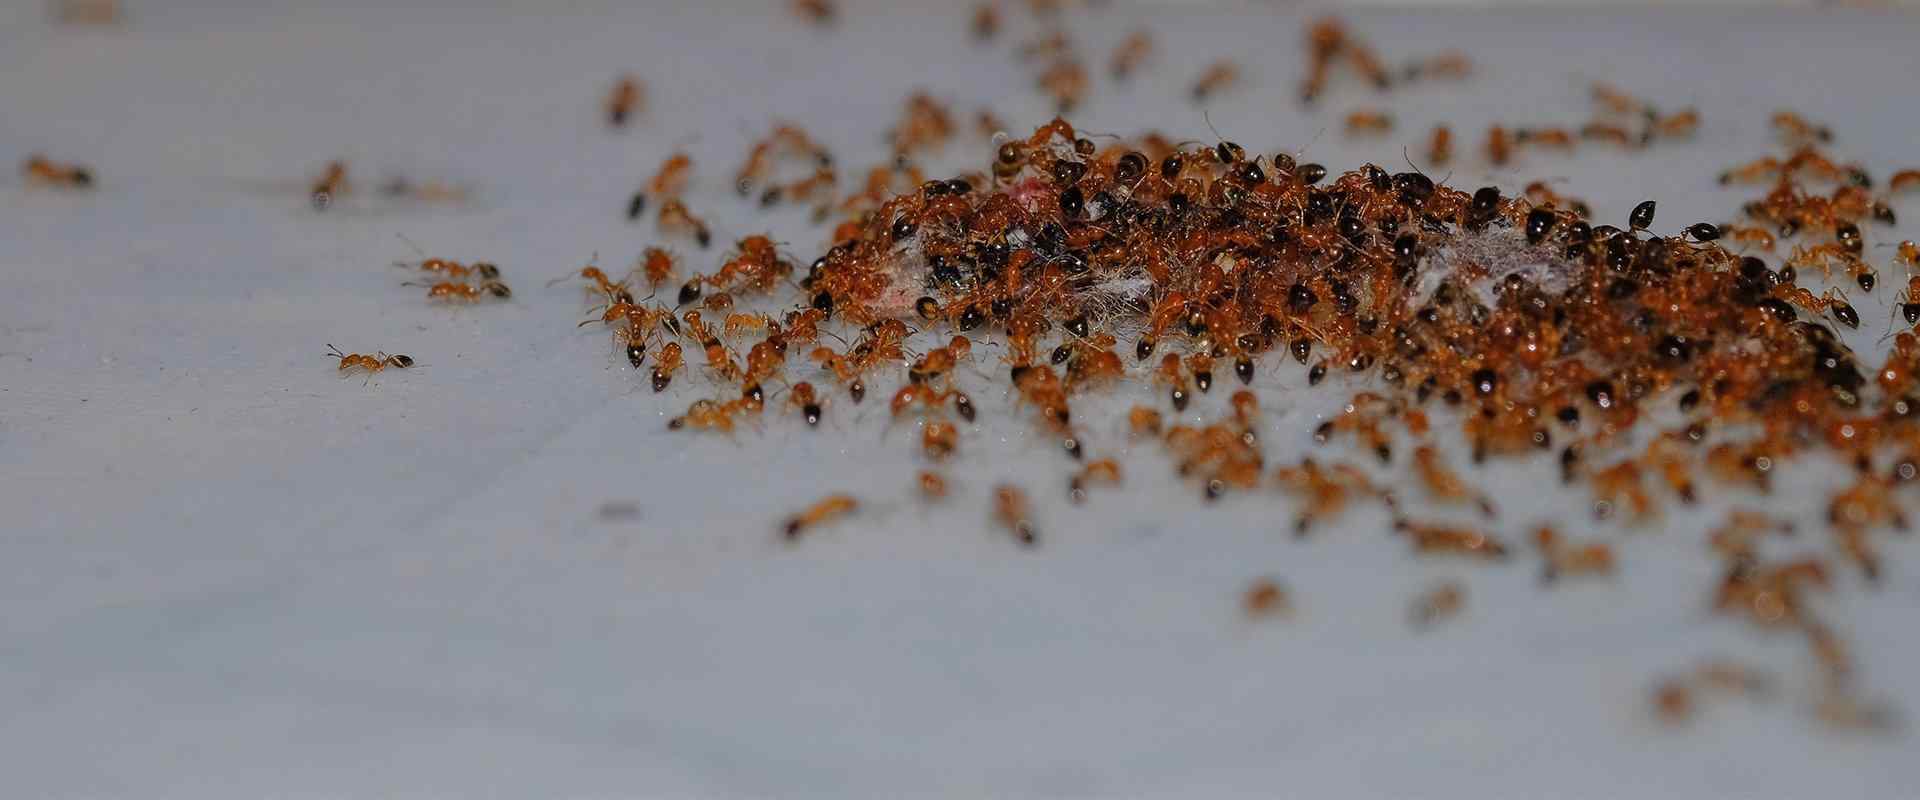 argentine ants on a kitchen counter top